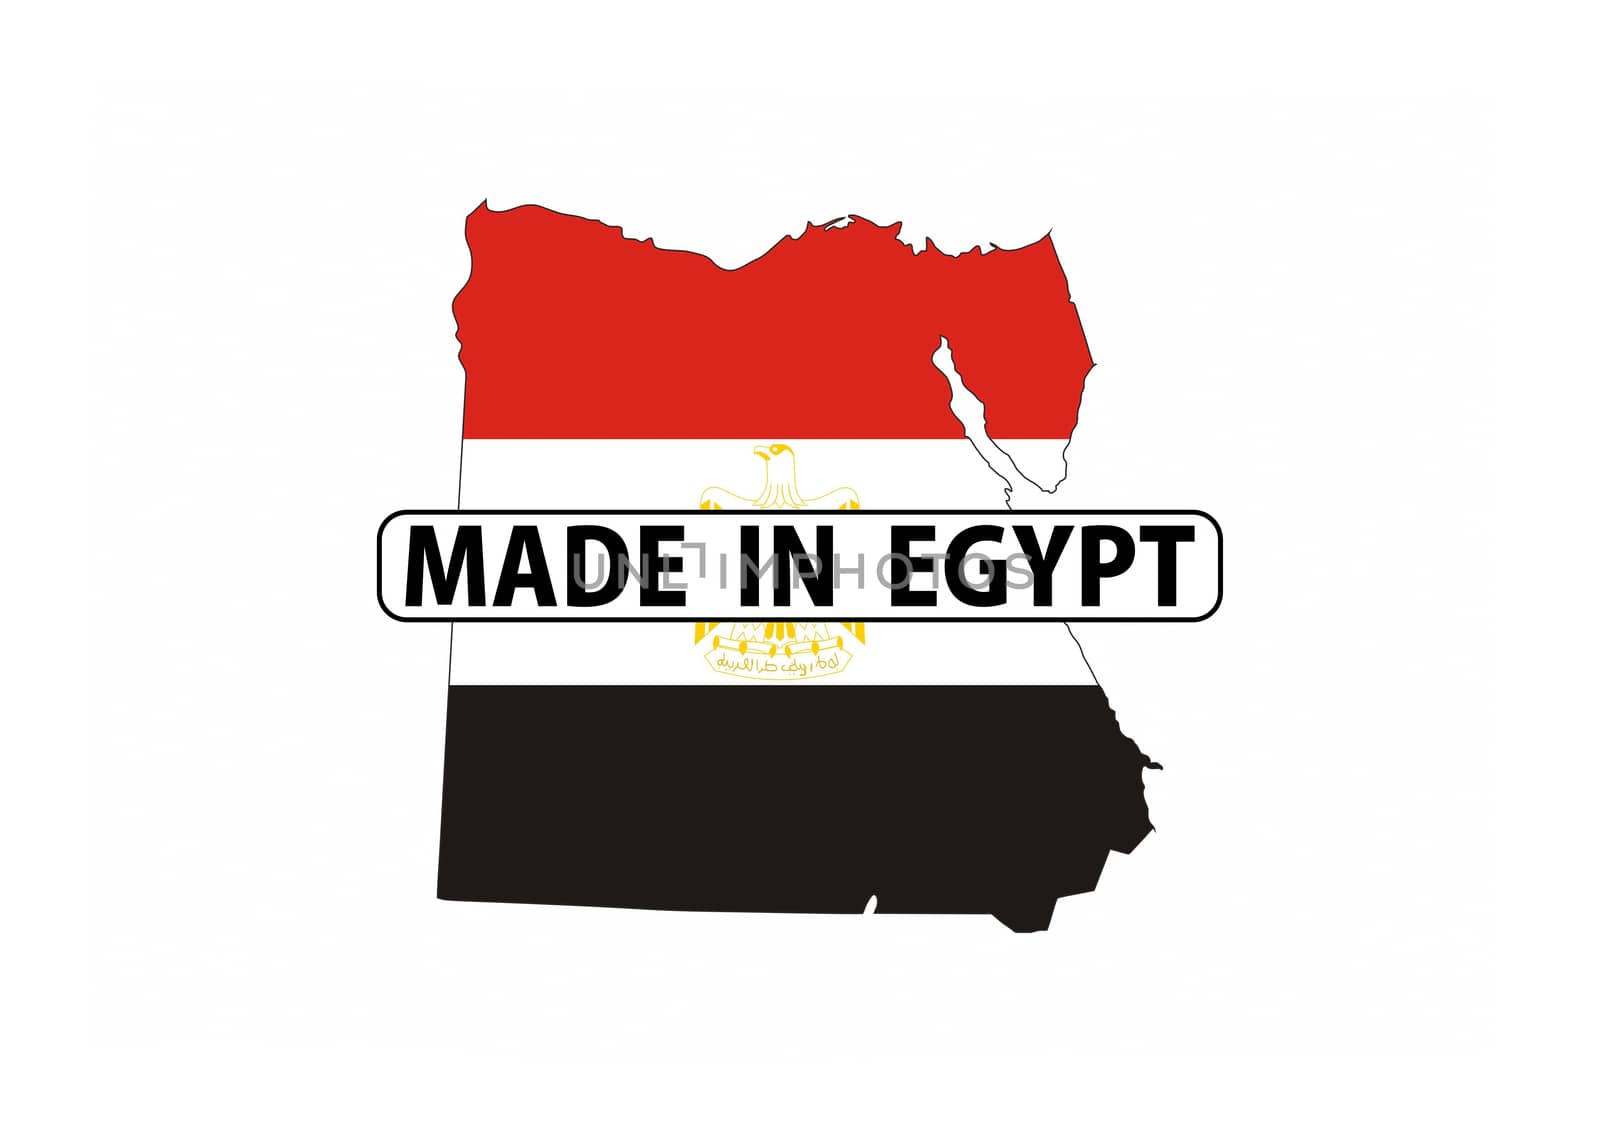 made in egypt country national flag map shape with text